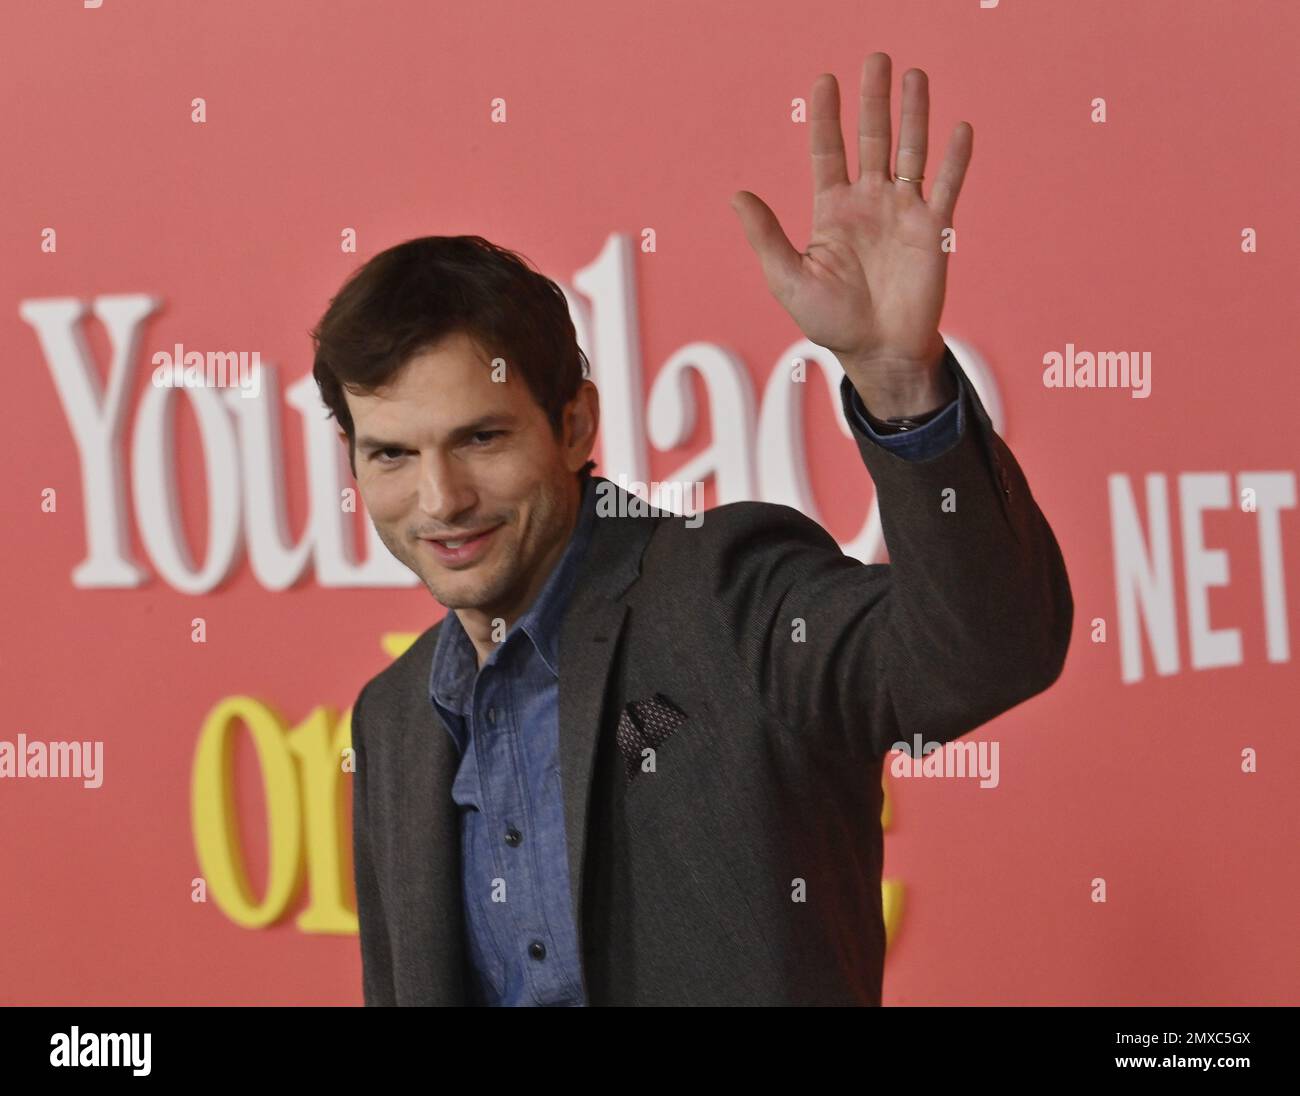 Los Angeles, United States. 02nd Feb, 2023. Cast member Ashton Kutcher attends the premiere of the motion picture romantic comedy 'Your Place or Mine' at the Regency Village Theatre in the Westwood section of Los Angeles on Thursday, February 2, 2023. Storyline: Two long-distance best friends change each other's lives when she decides to pursue a lifelong dream and he volunteers to keep an eye on her teenage son. Photo by Jim Ruymen/UPI Credit: UPI/Alamy Live News Stock Photo